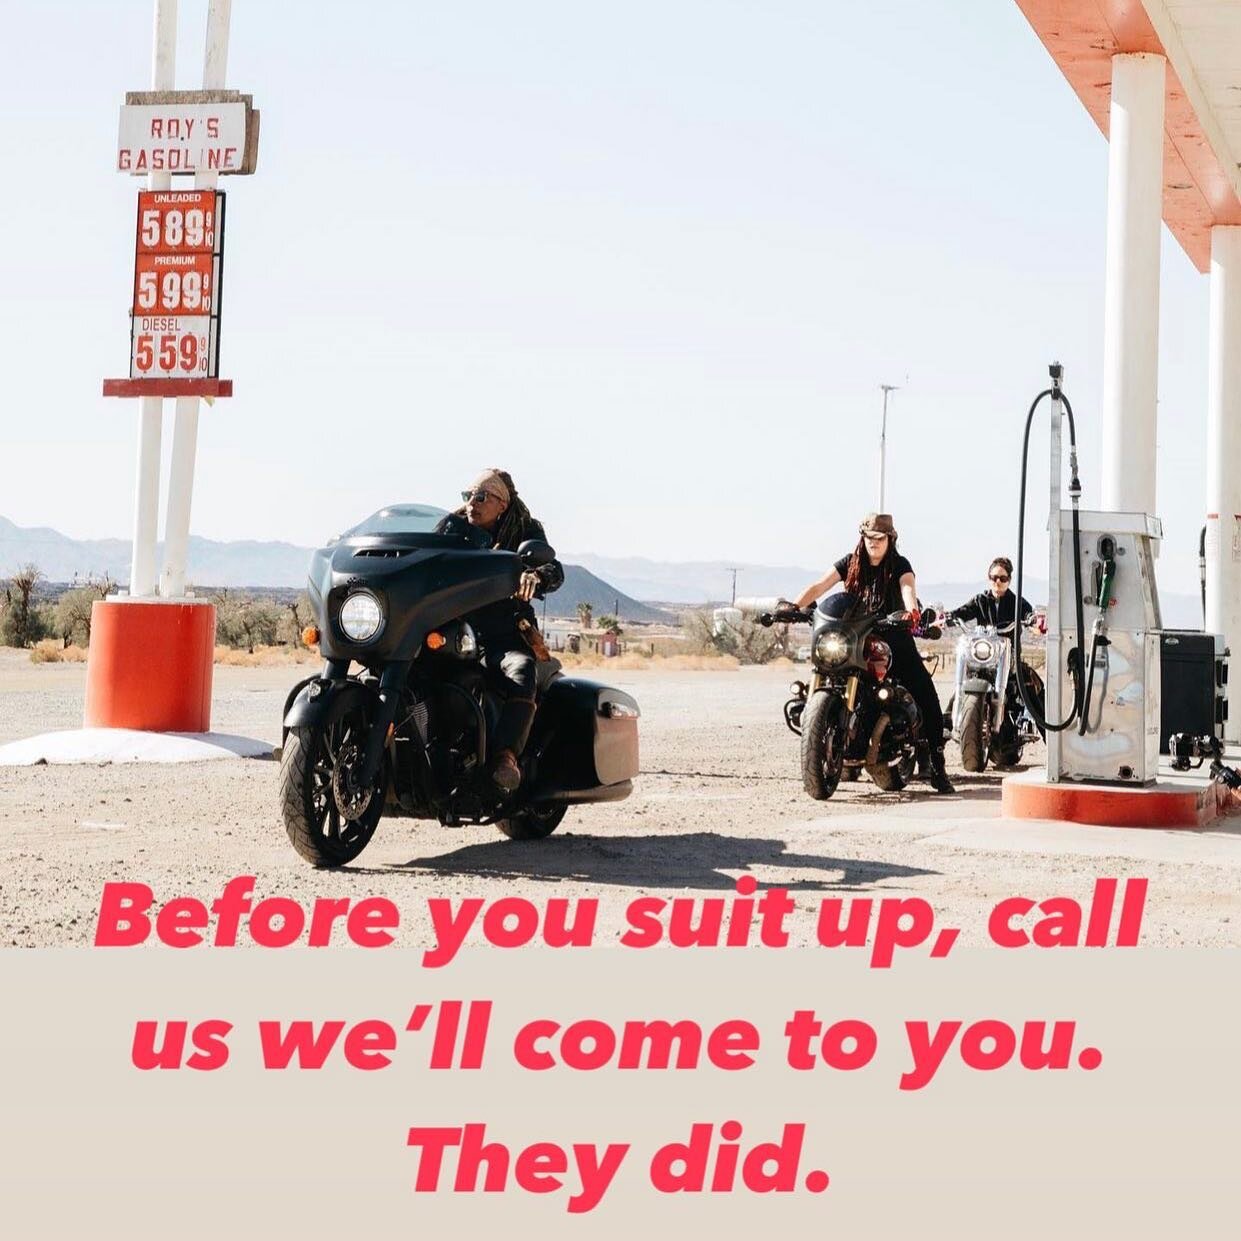 Freedom comes at a price, it doesn&rsquo;t have to be your hearing. We are glad to set you up with a custom set that matches your gear. #motorcycle #motorcycles #femaleentrepreneur #harleygirl #girlswhoride #girlswhoridemotorcycles